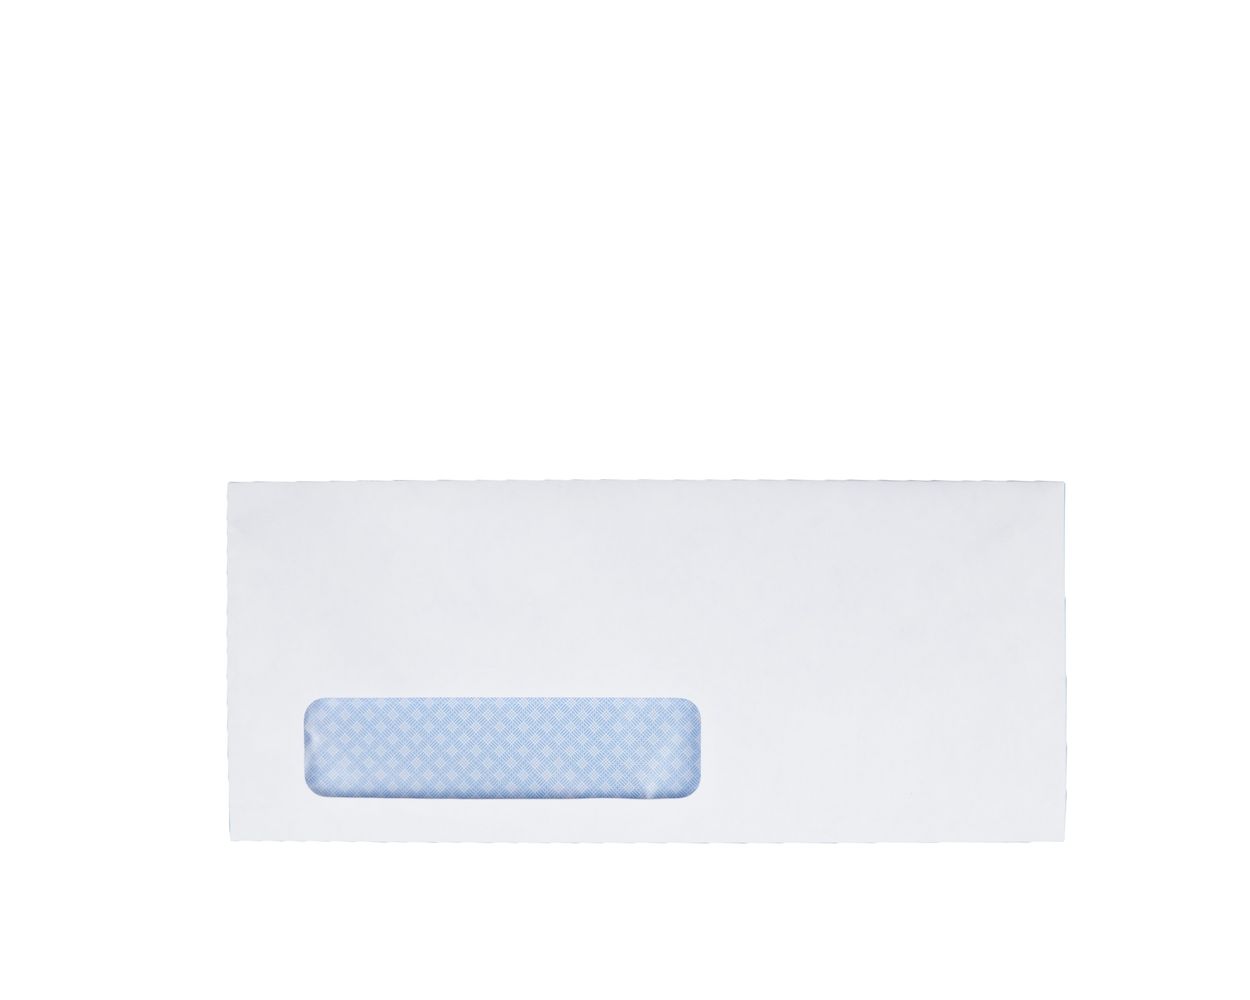 4 1/8 X 9 1/2 Envelope Template from www.tops-products.com